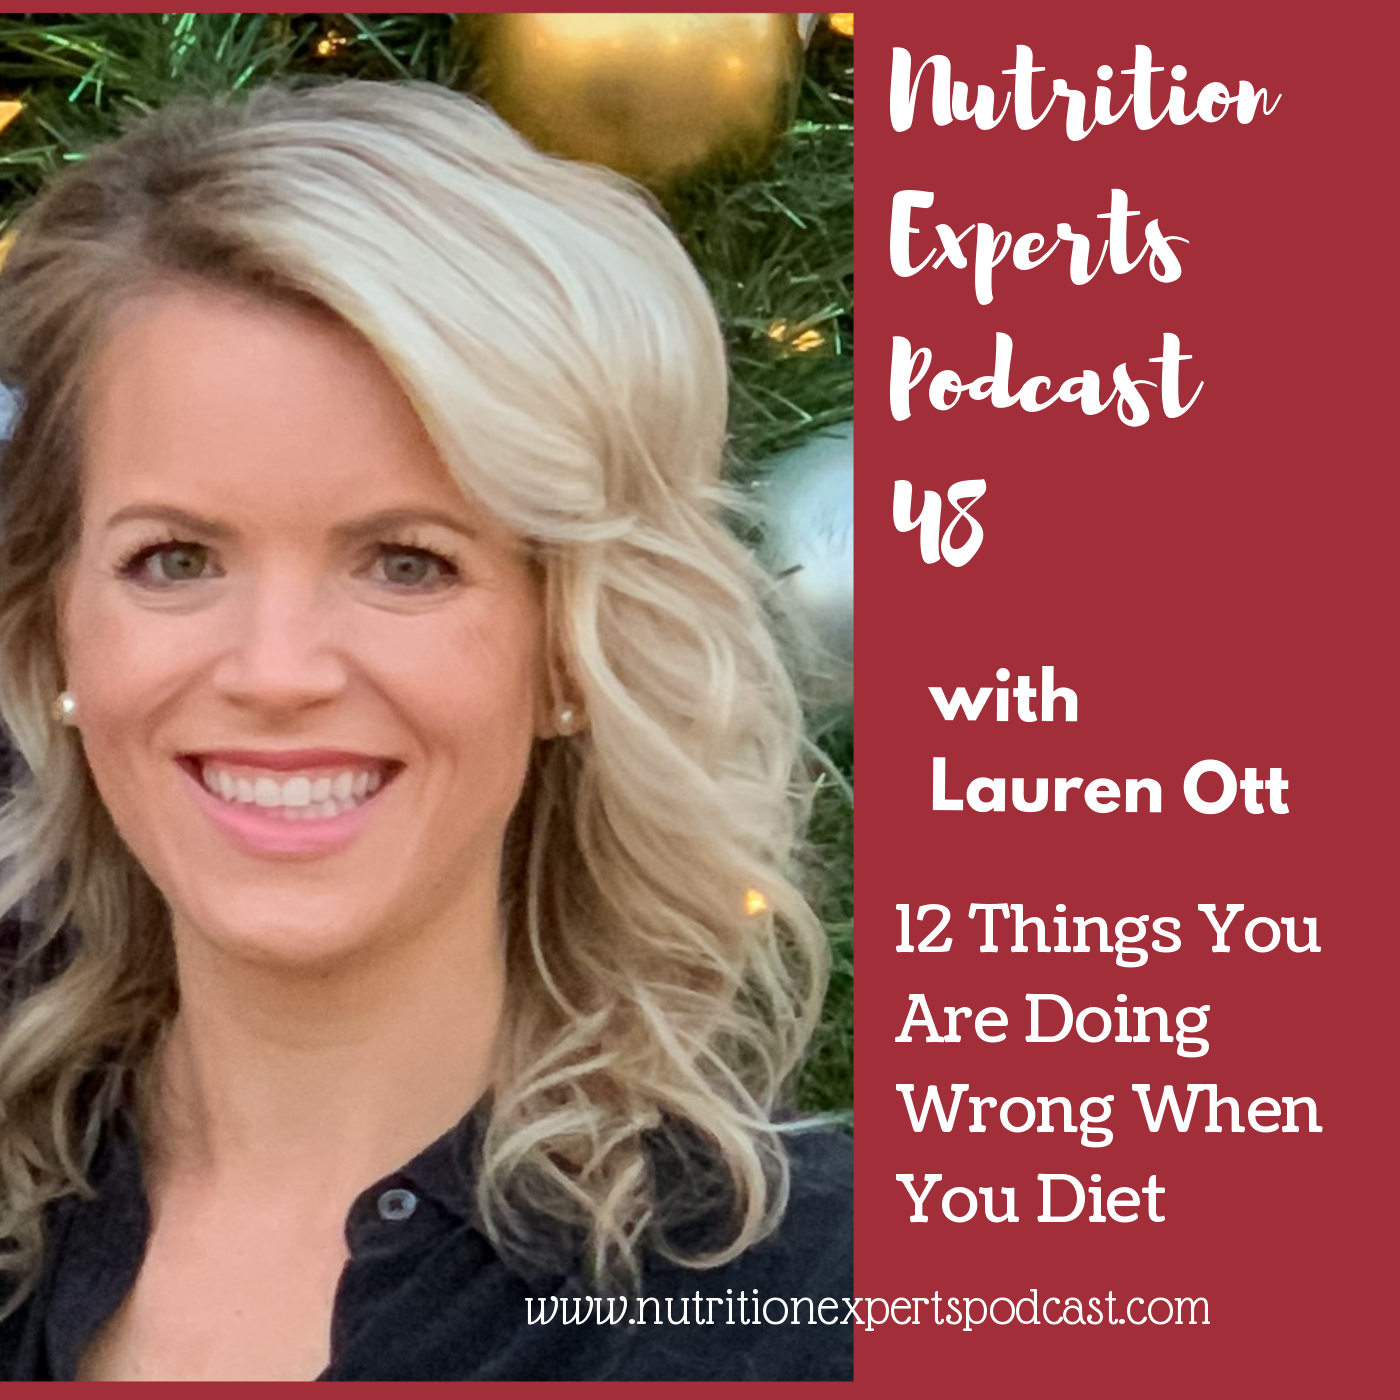 Nutrition Experts Podcast Episode 48: 12 Things You Are Doing Wrong When You Diet with Lauren Ott, RD